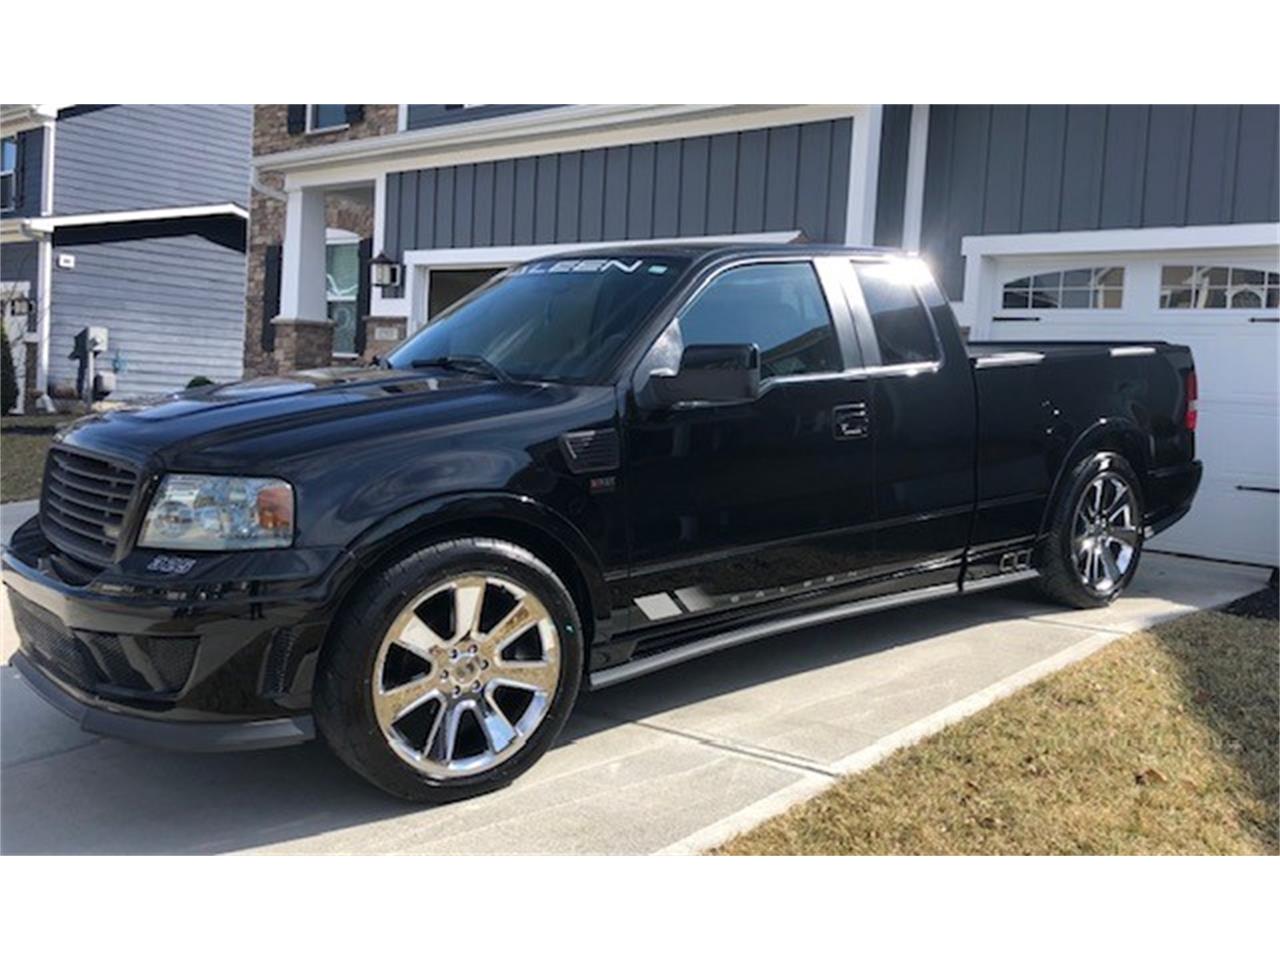 Pick of the Day: 2007 Ford F-150 Saleen S331 | ClassicCars.com Journal